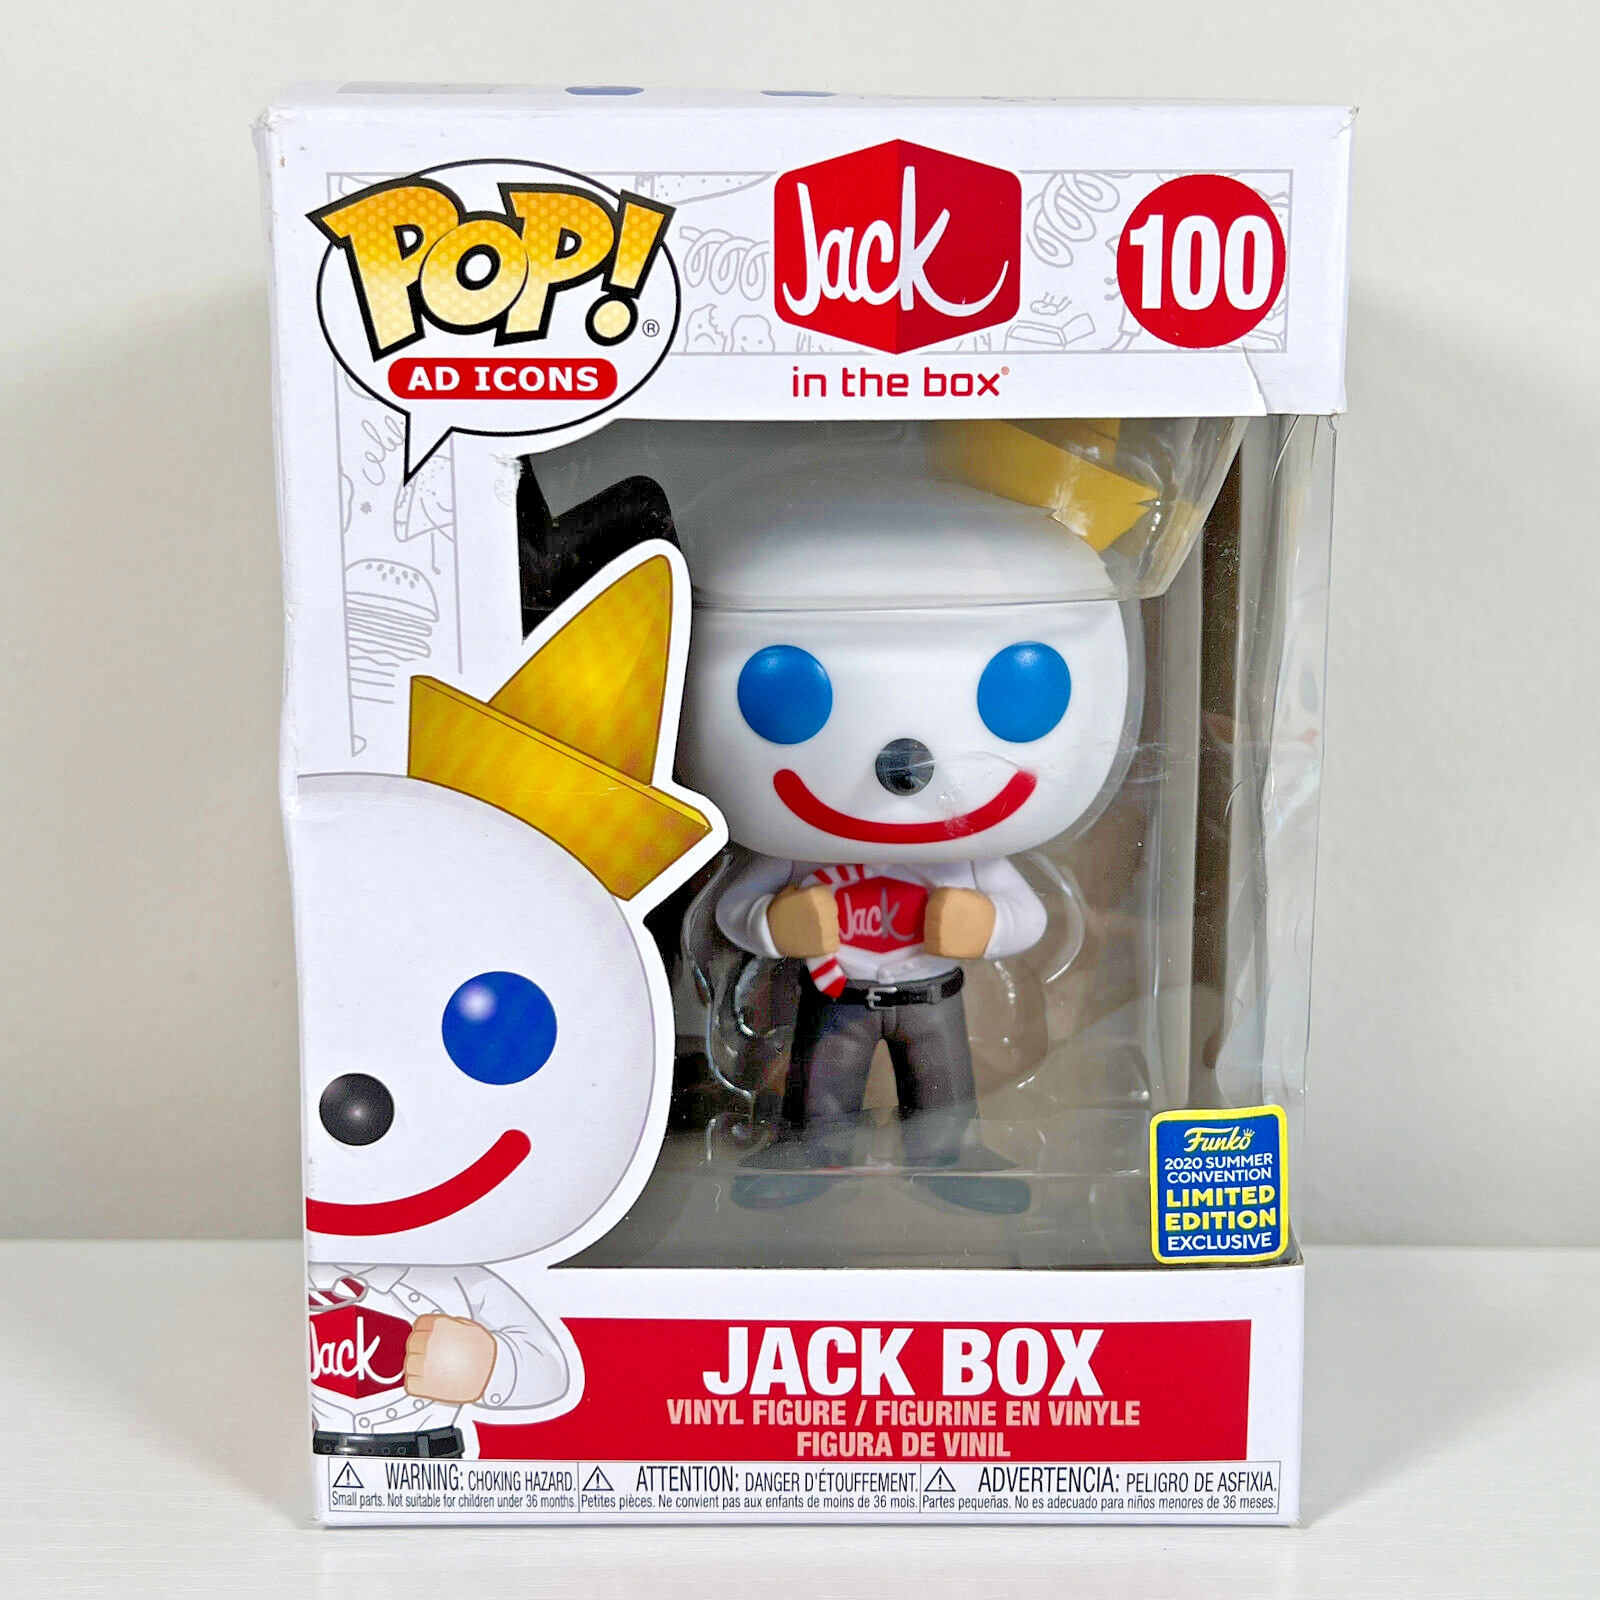 Funko Pop Ad Icons: Jack in the Box #100 Jack Box 2020 Summer Convention Lim Ed